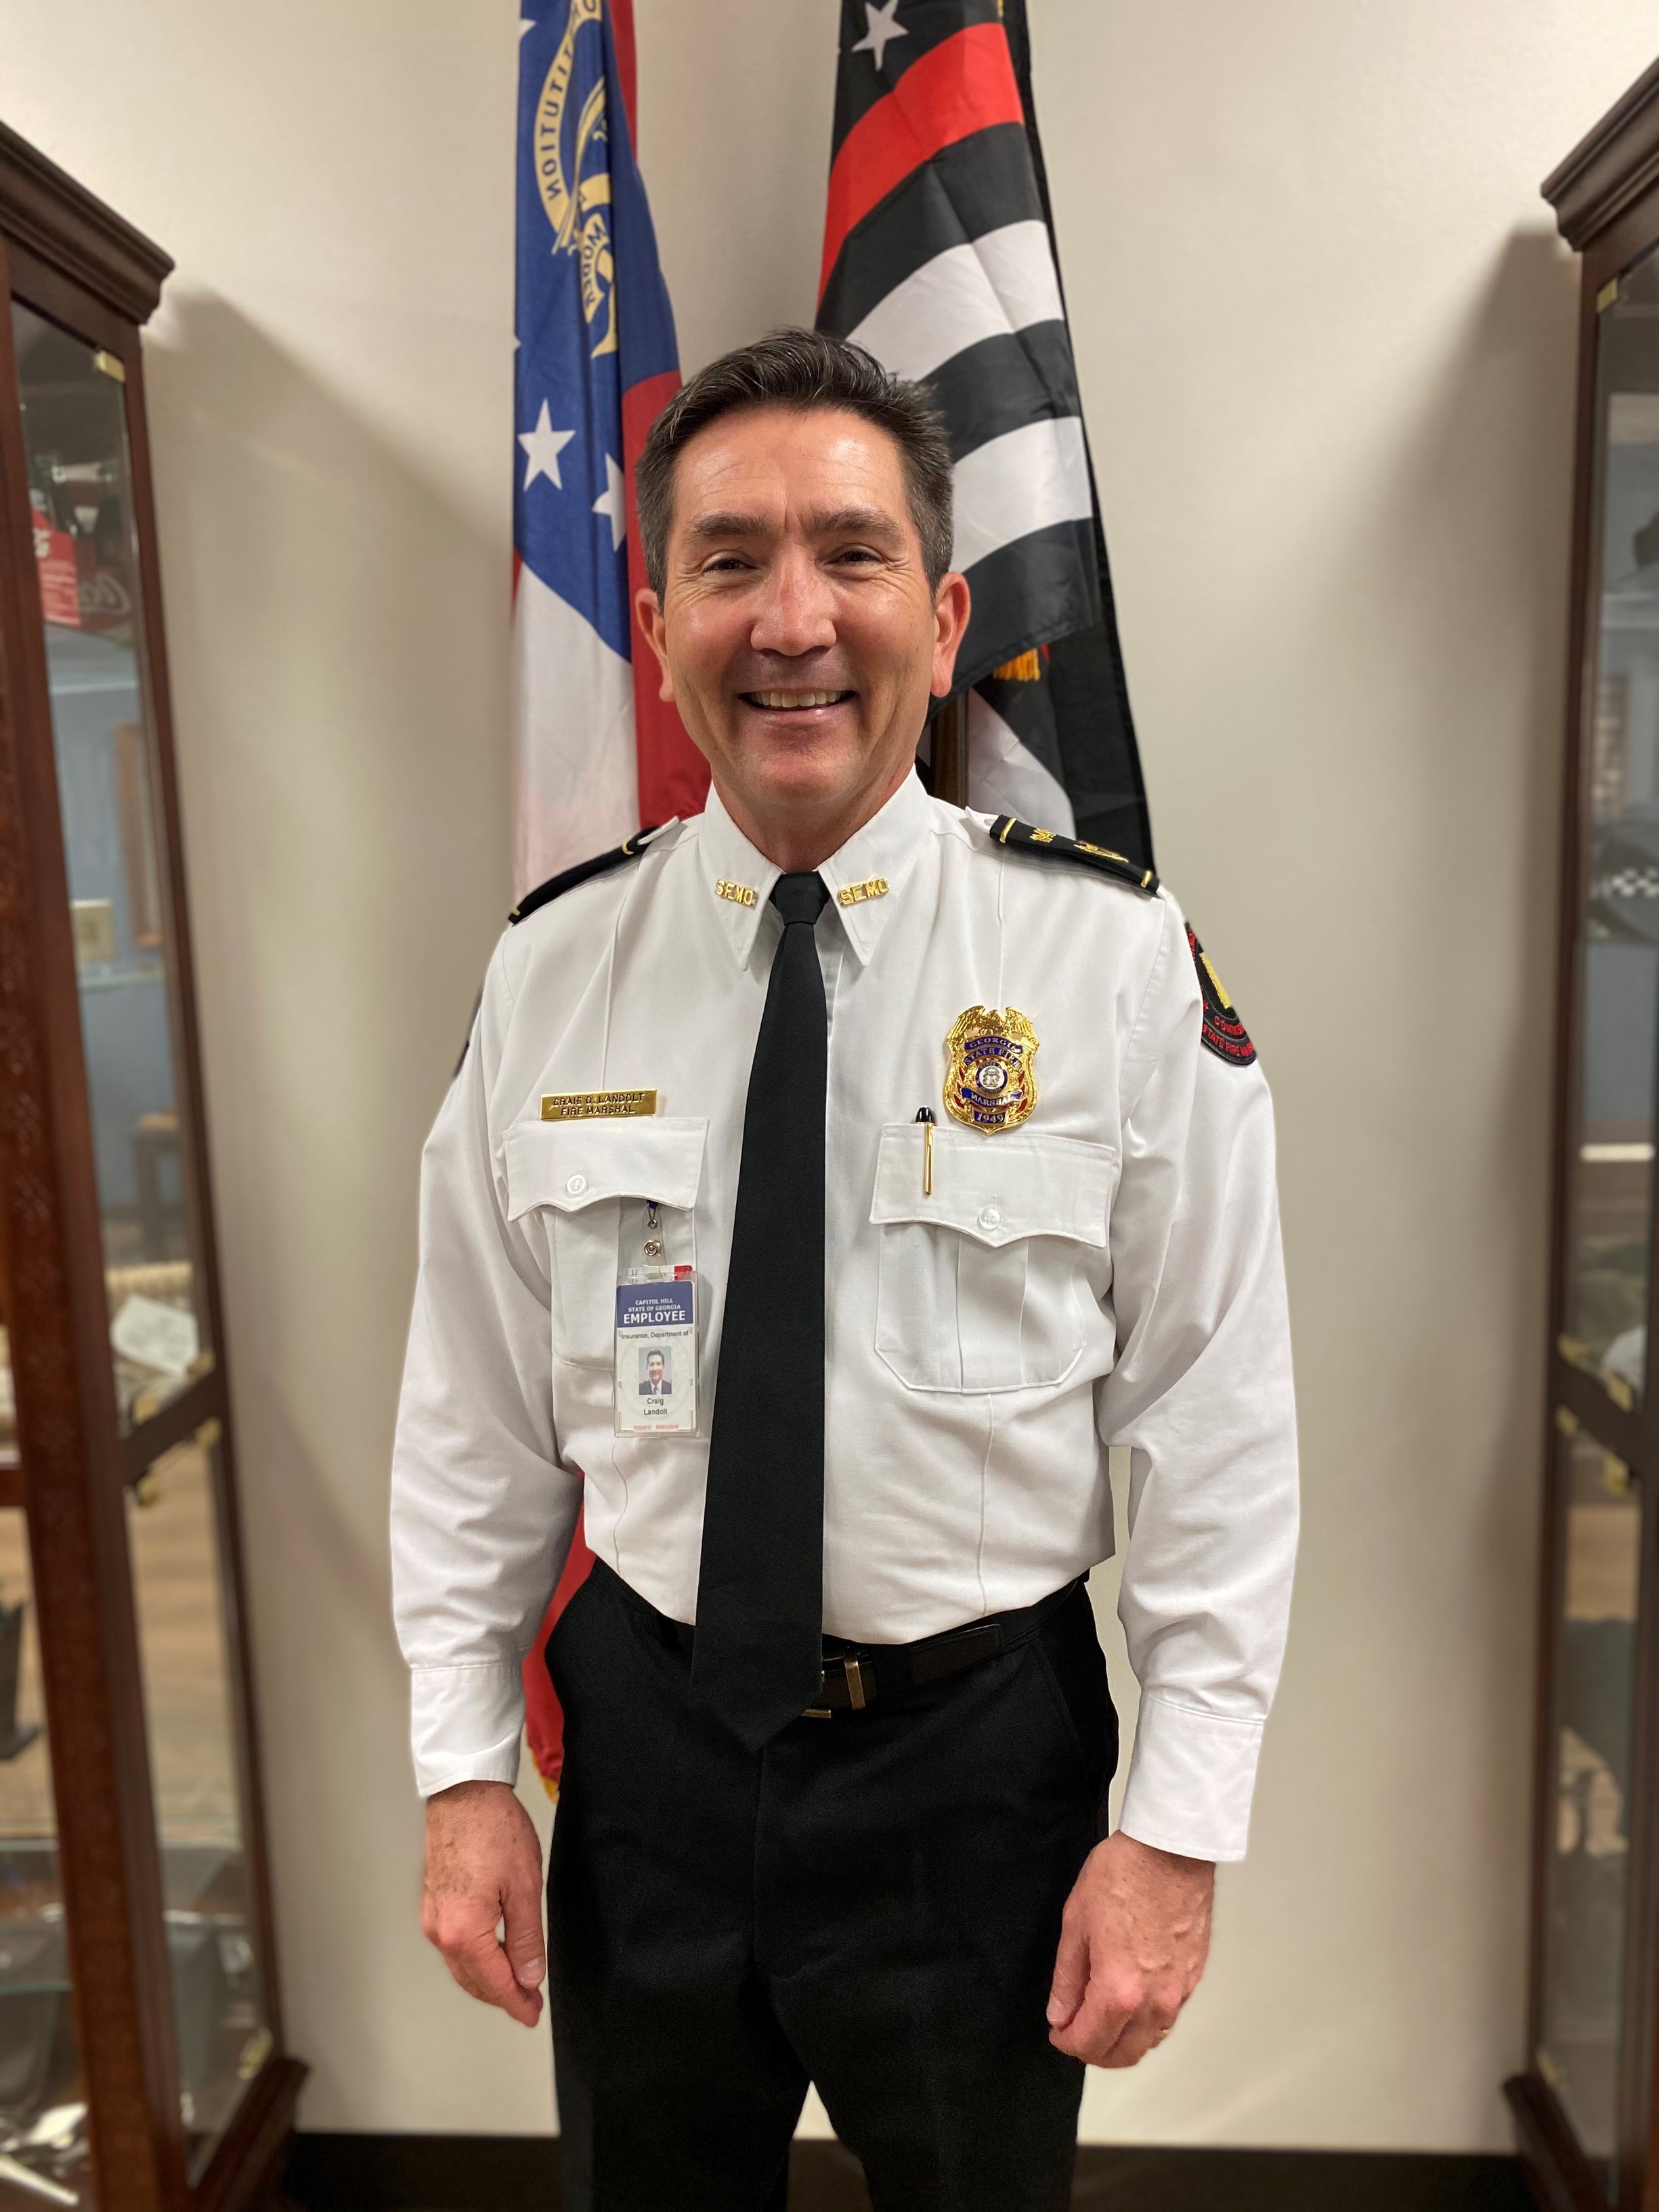 Craig Landolt Sworn in as State Fire Marshal Office of the